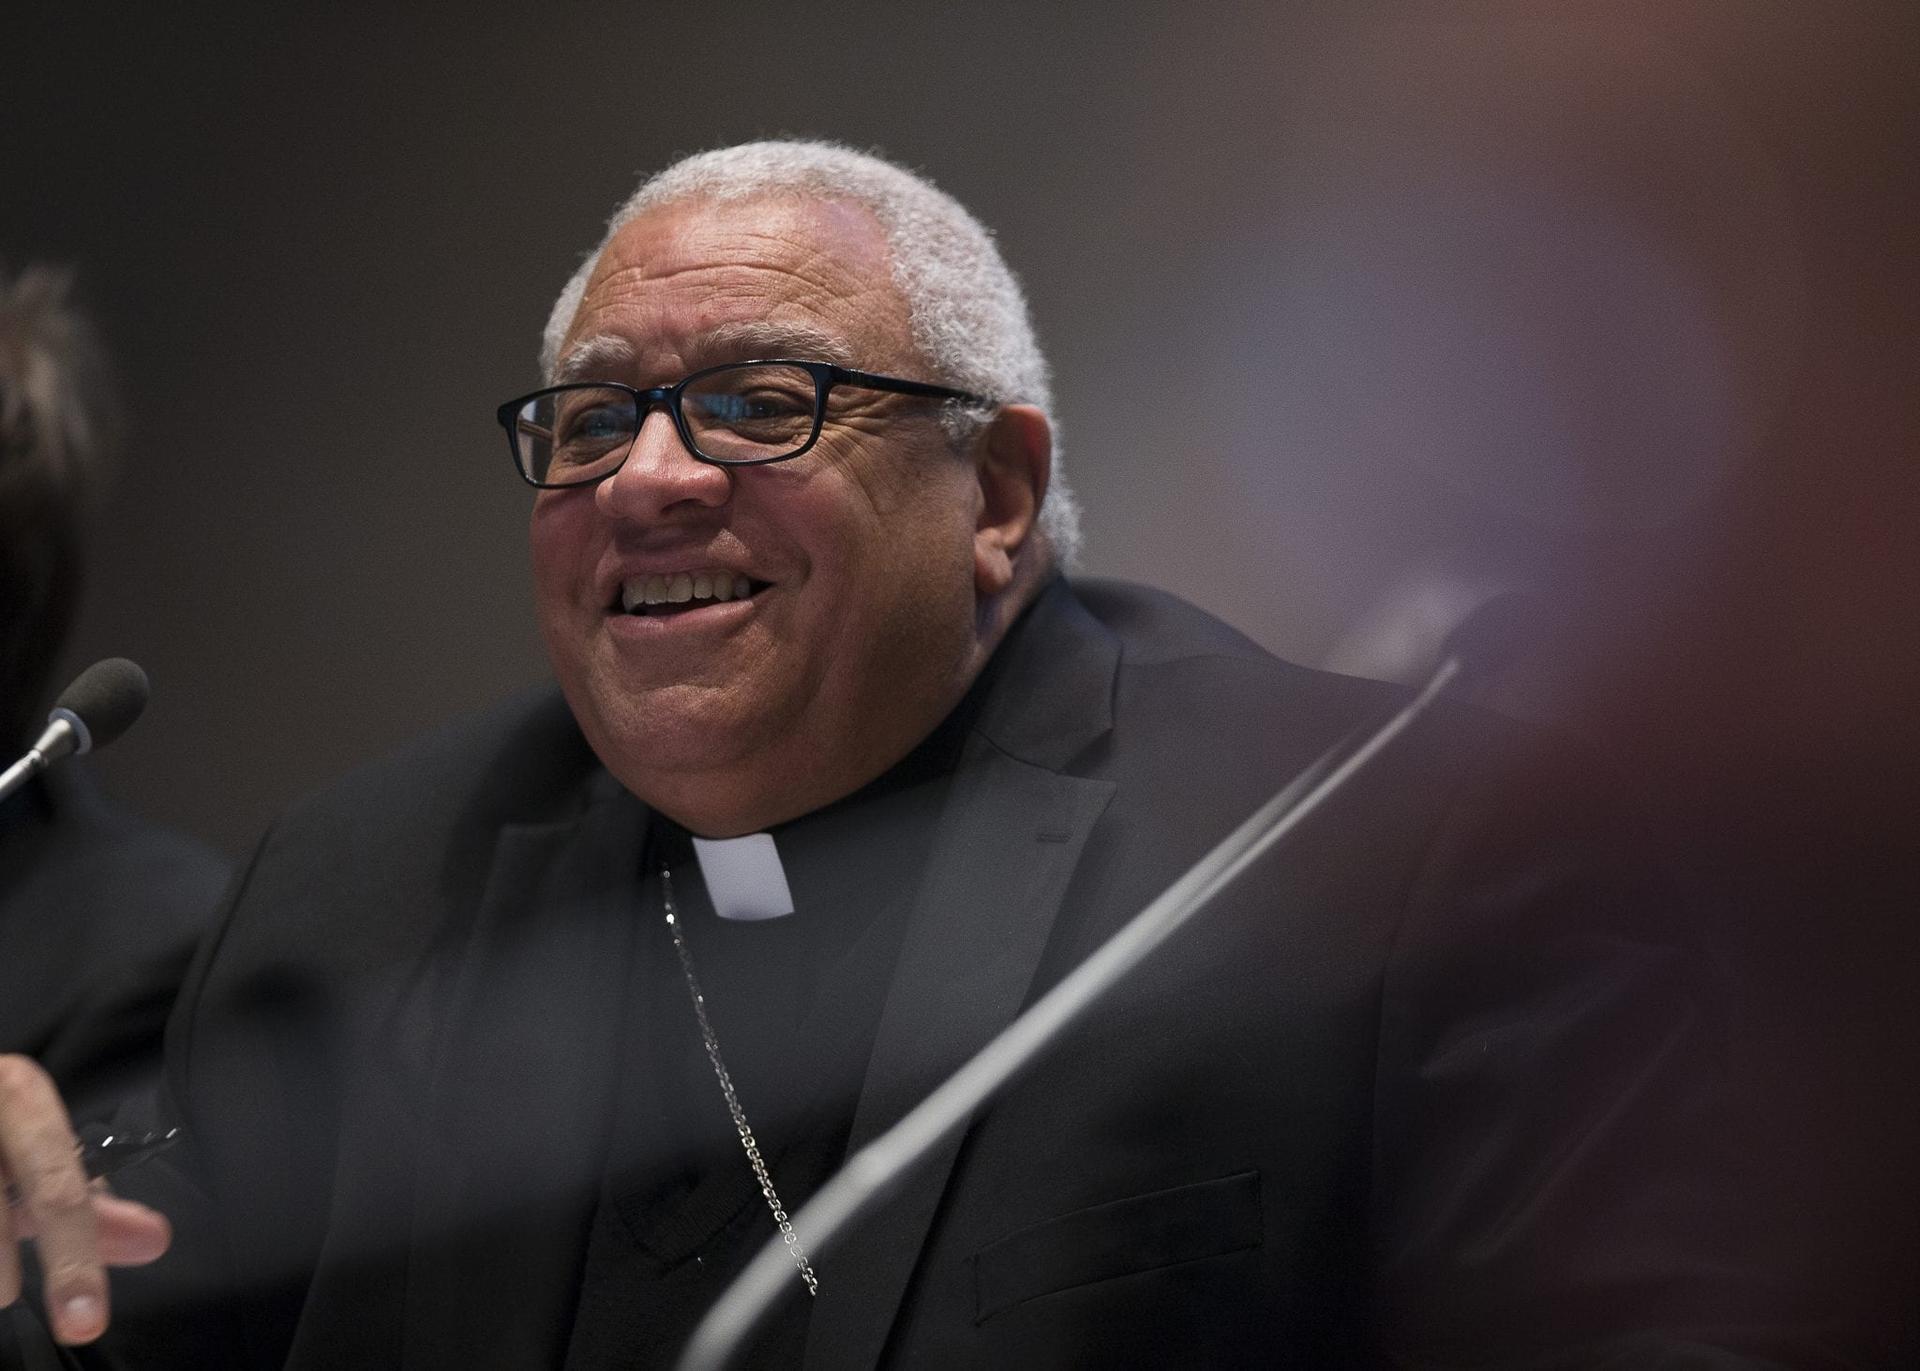 Bishops consider plans to revitalize appeal of a Catholic education